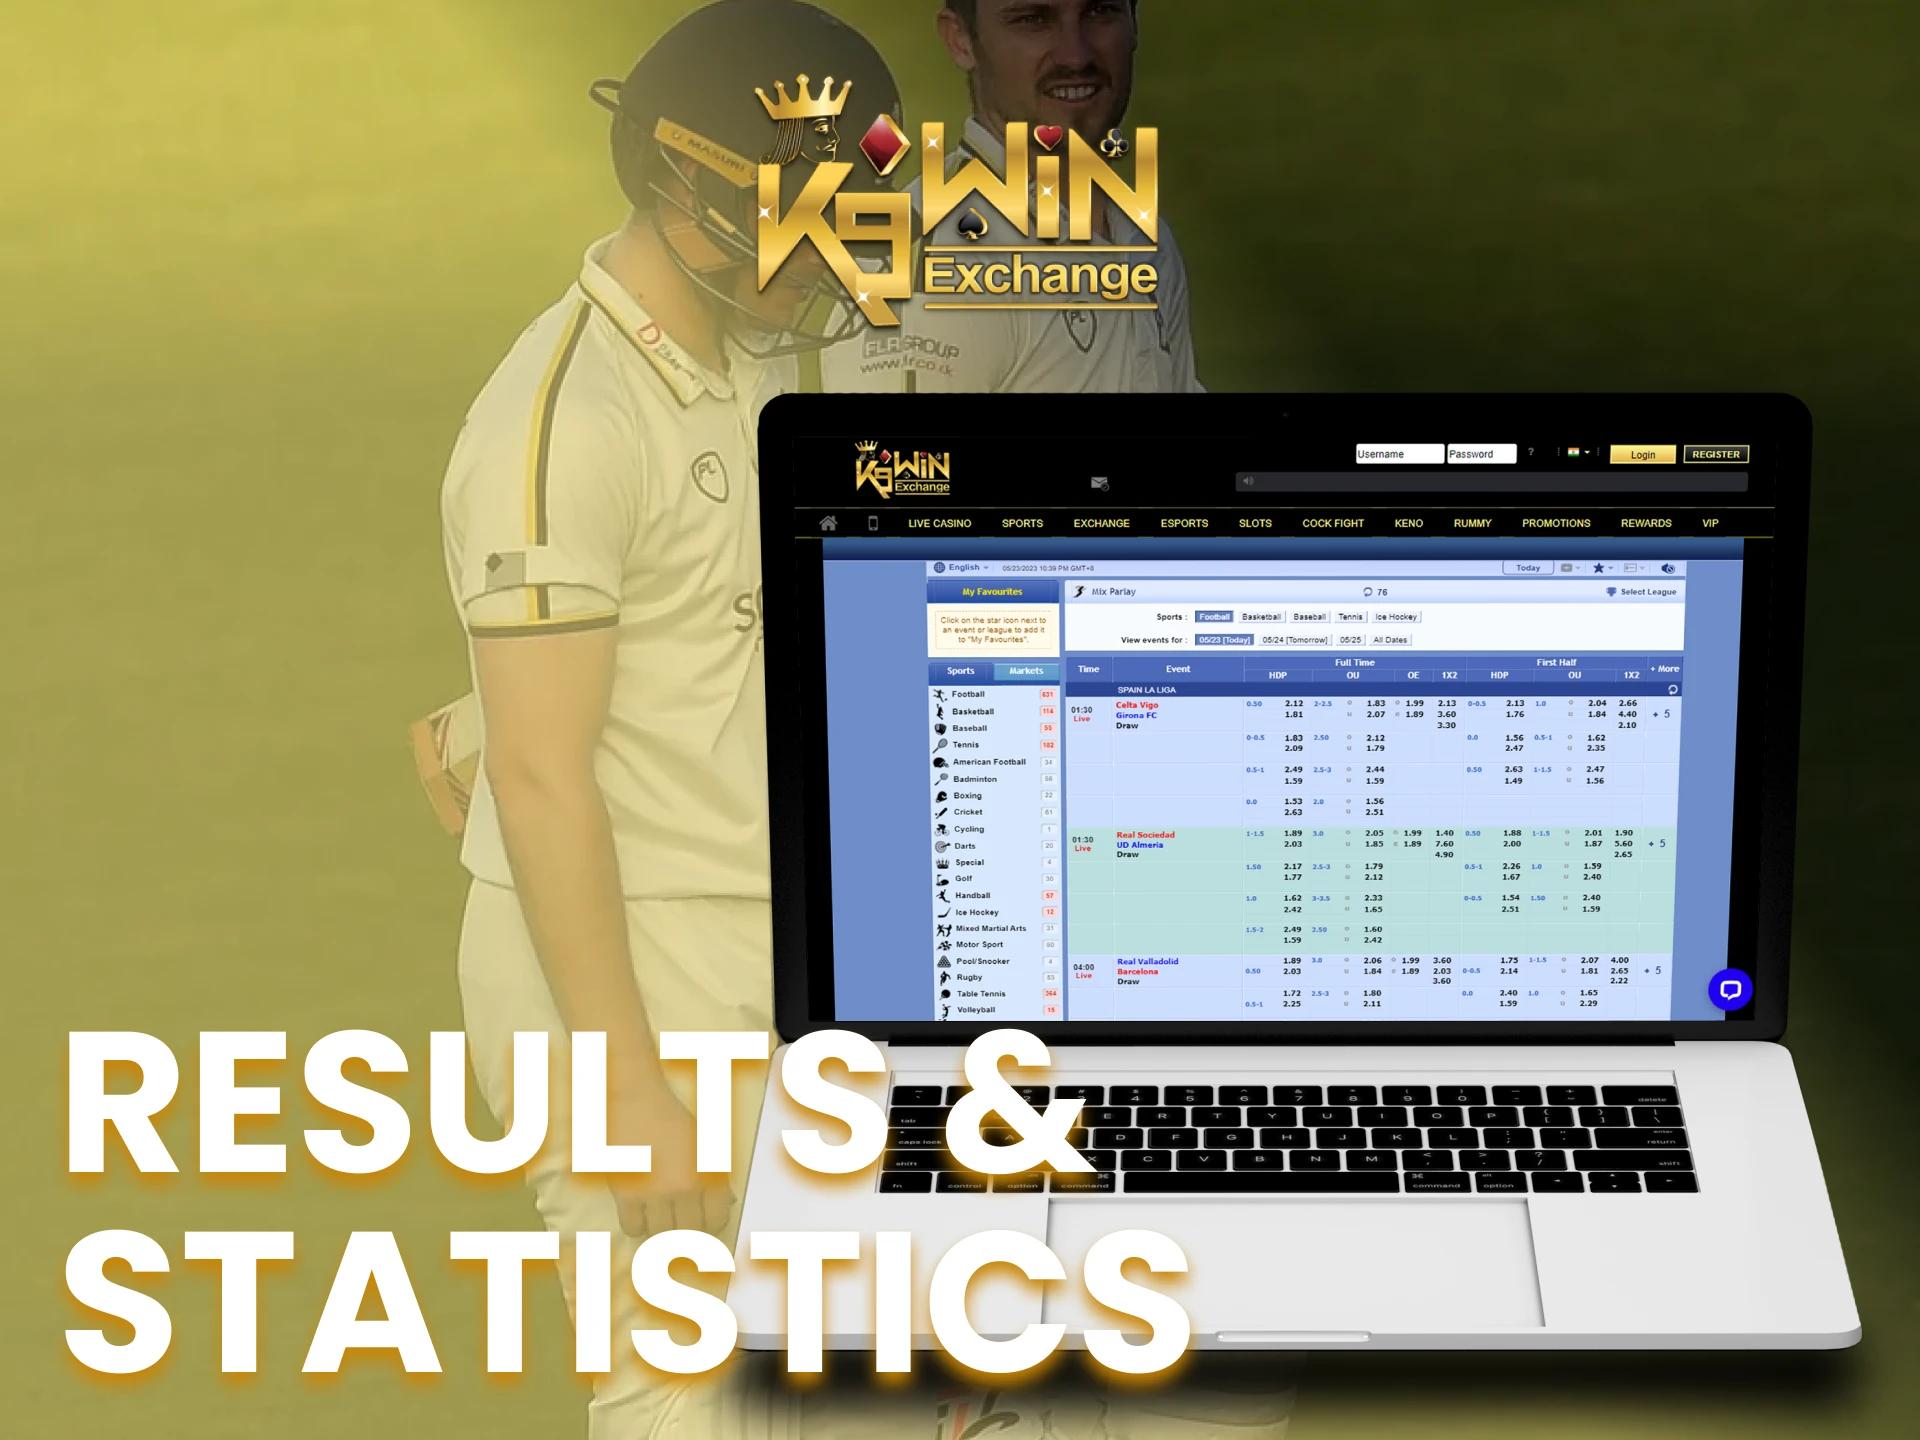 Watch the results of previous matches on the K9Win statistics page.